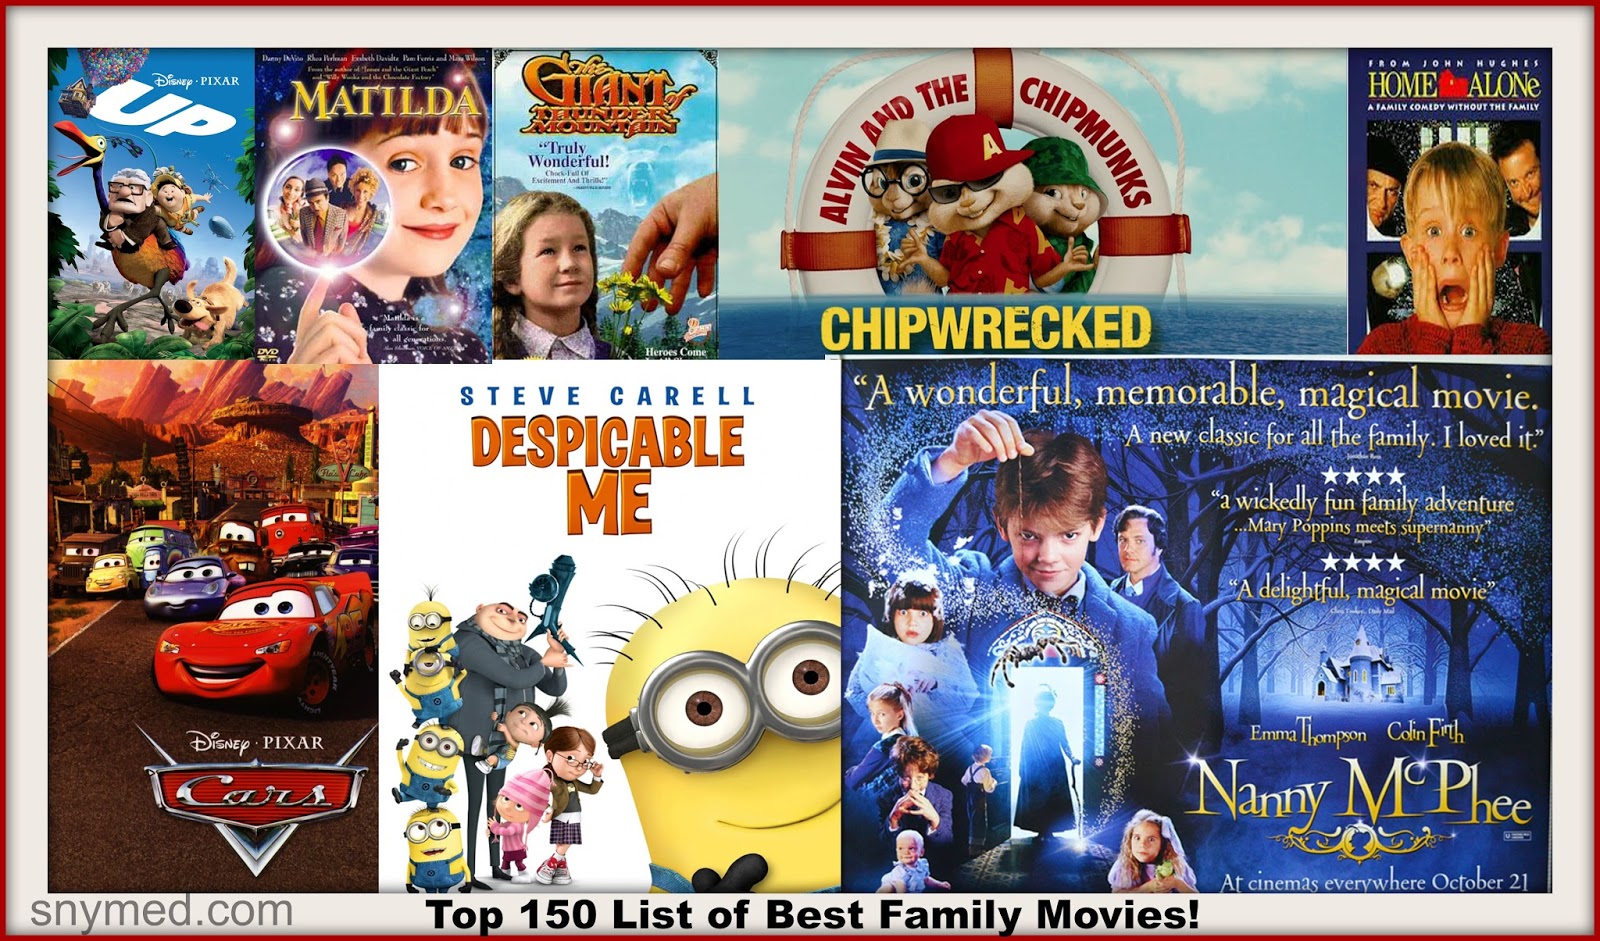 Top 150 List of Best Family Movies to Watch With the Kids Tonight! snymed